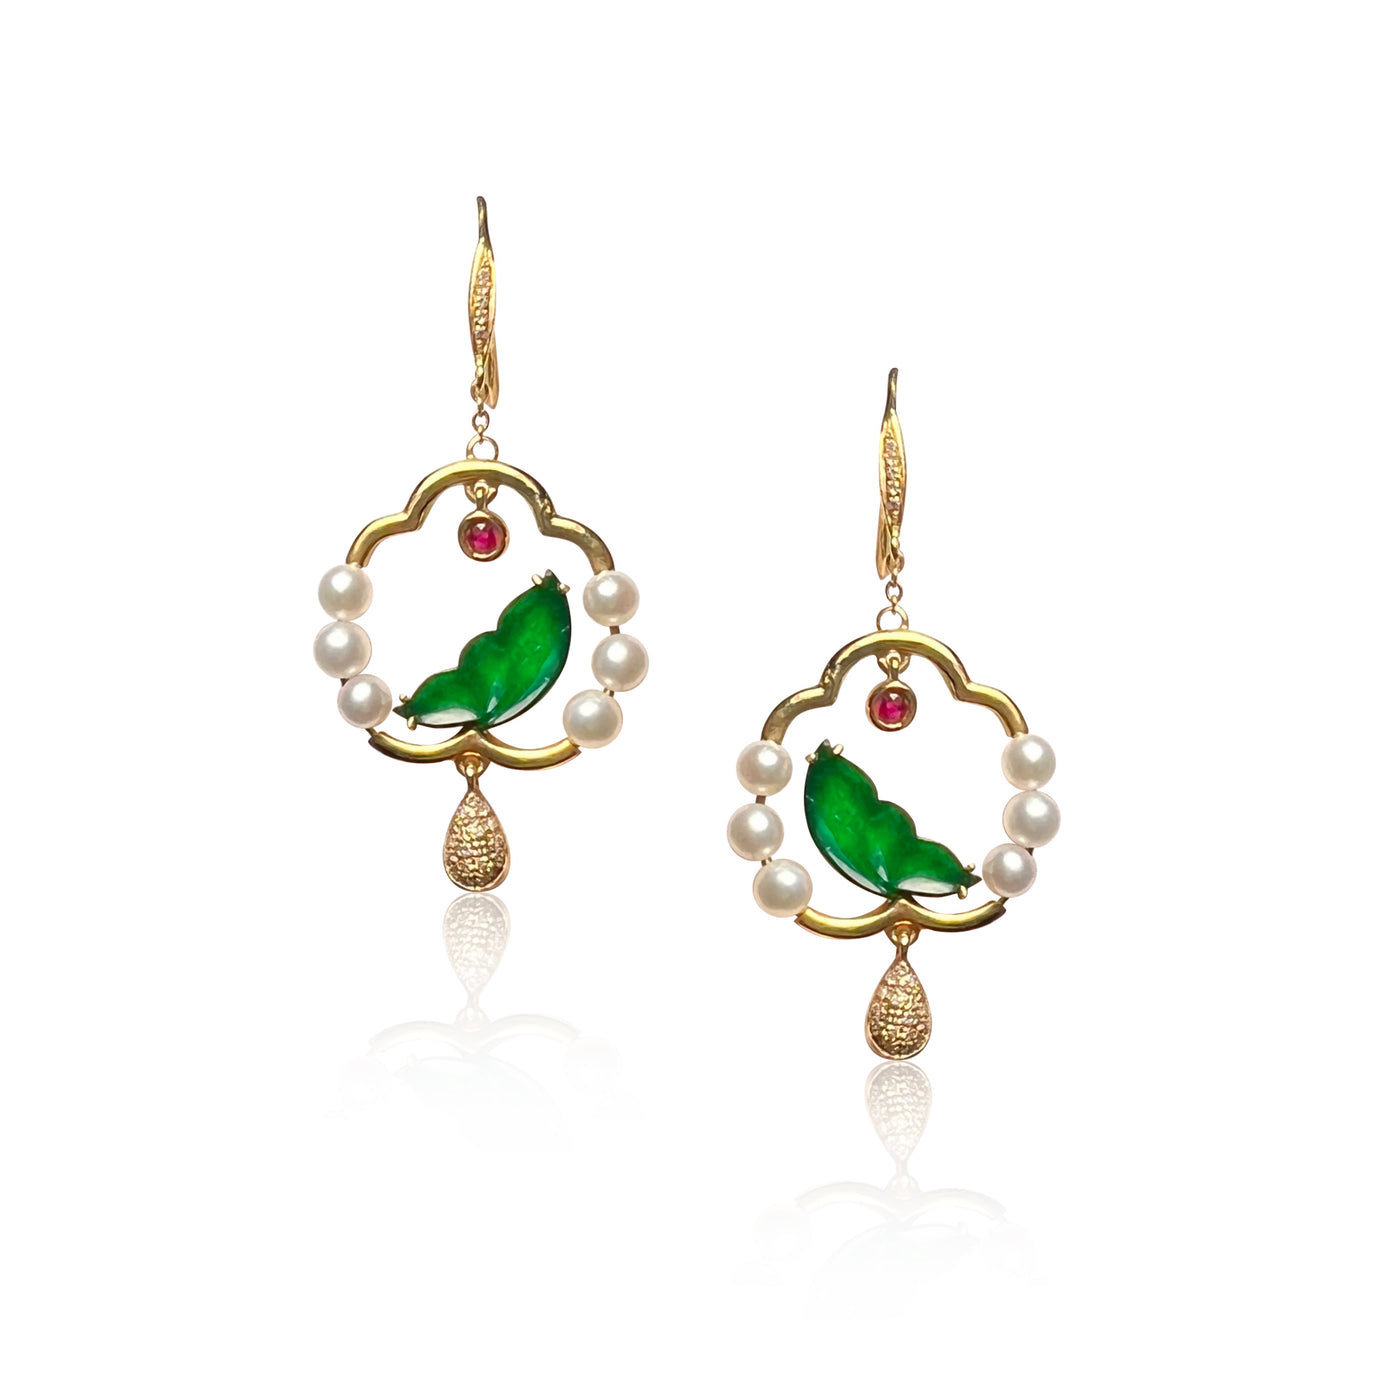 UCHIWA (TRADITIONAL FAN) JADEITE Earrings in 18k Yellow gold and ruby